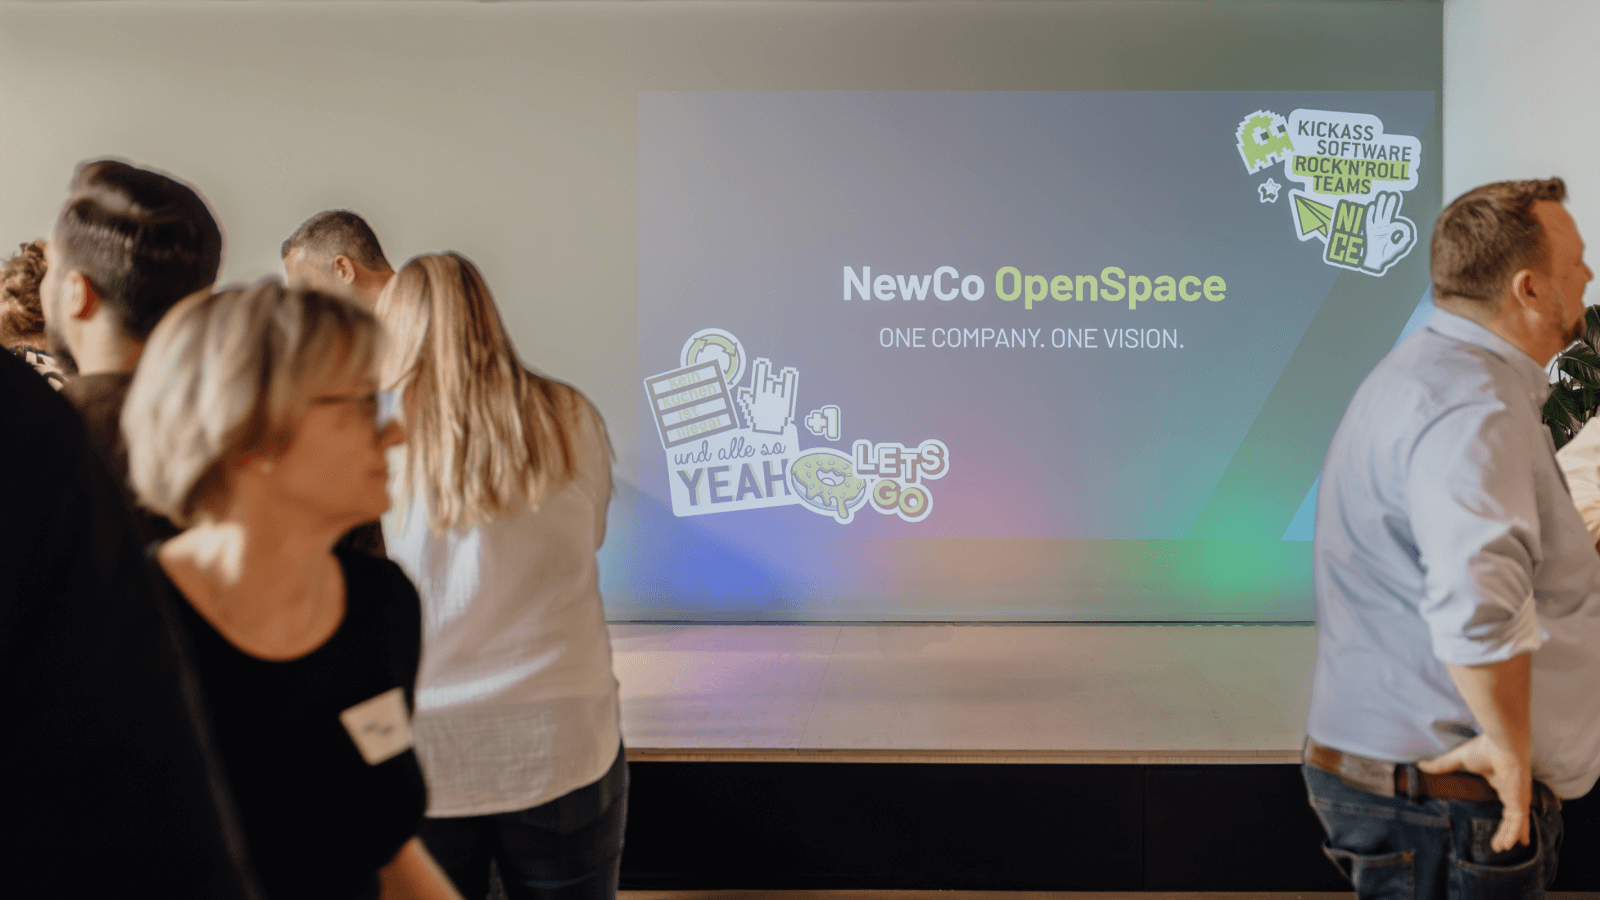 #5havebecome1: Seibert Solutions takes flight for your Atlassian ecosystem! - photo of people in front of our event stage with "NewCo OpenSpace - one company, one vision" projected onto the background